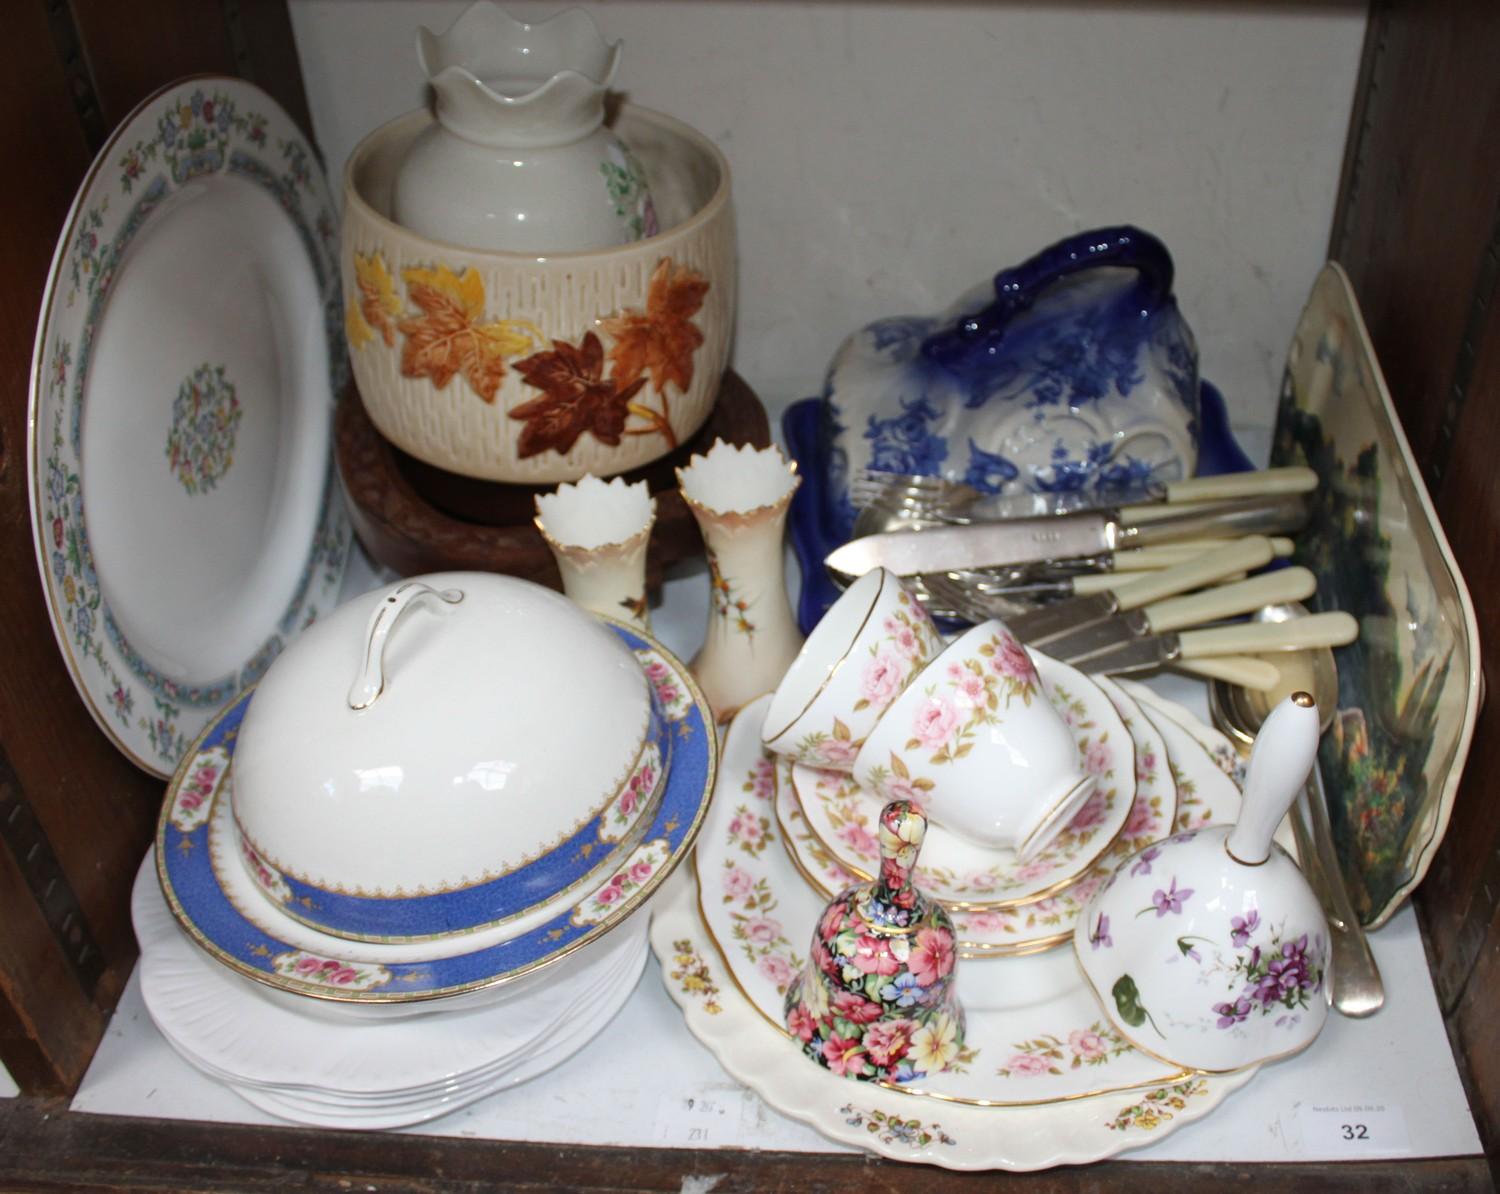 SECTION 32. A mixed lot of ceramics including a blue and white cheese dish and cover, a large